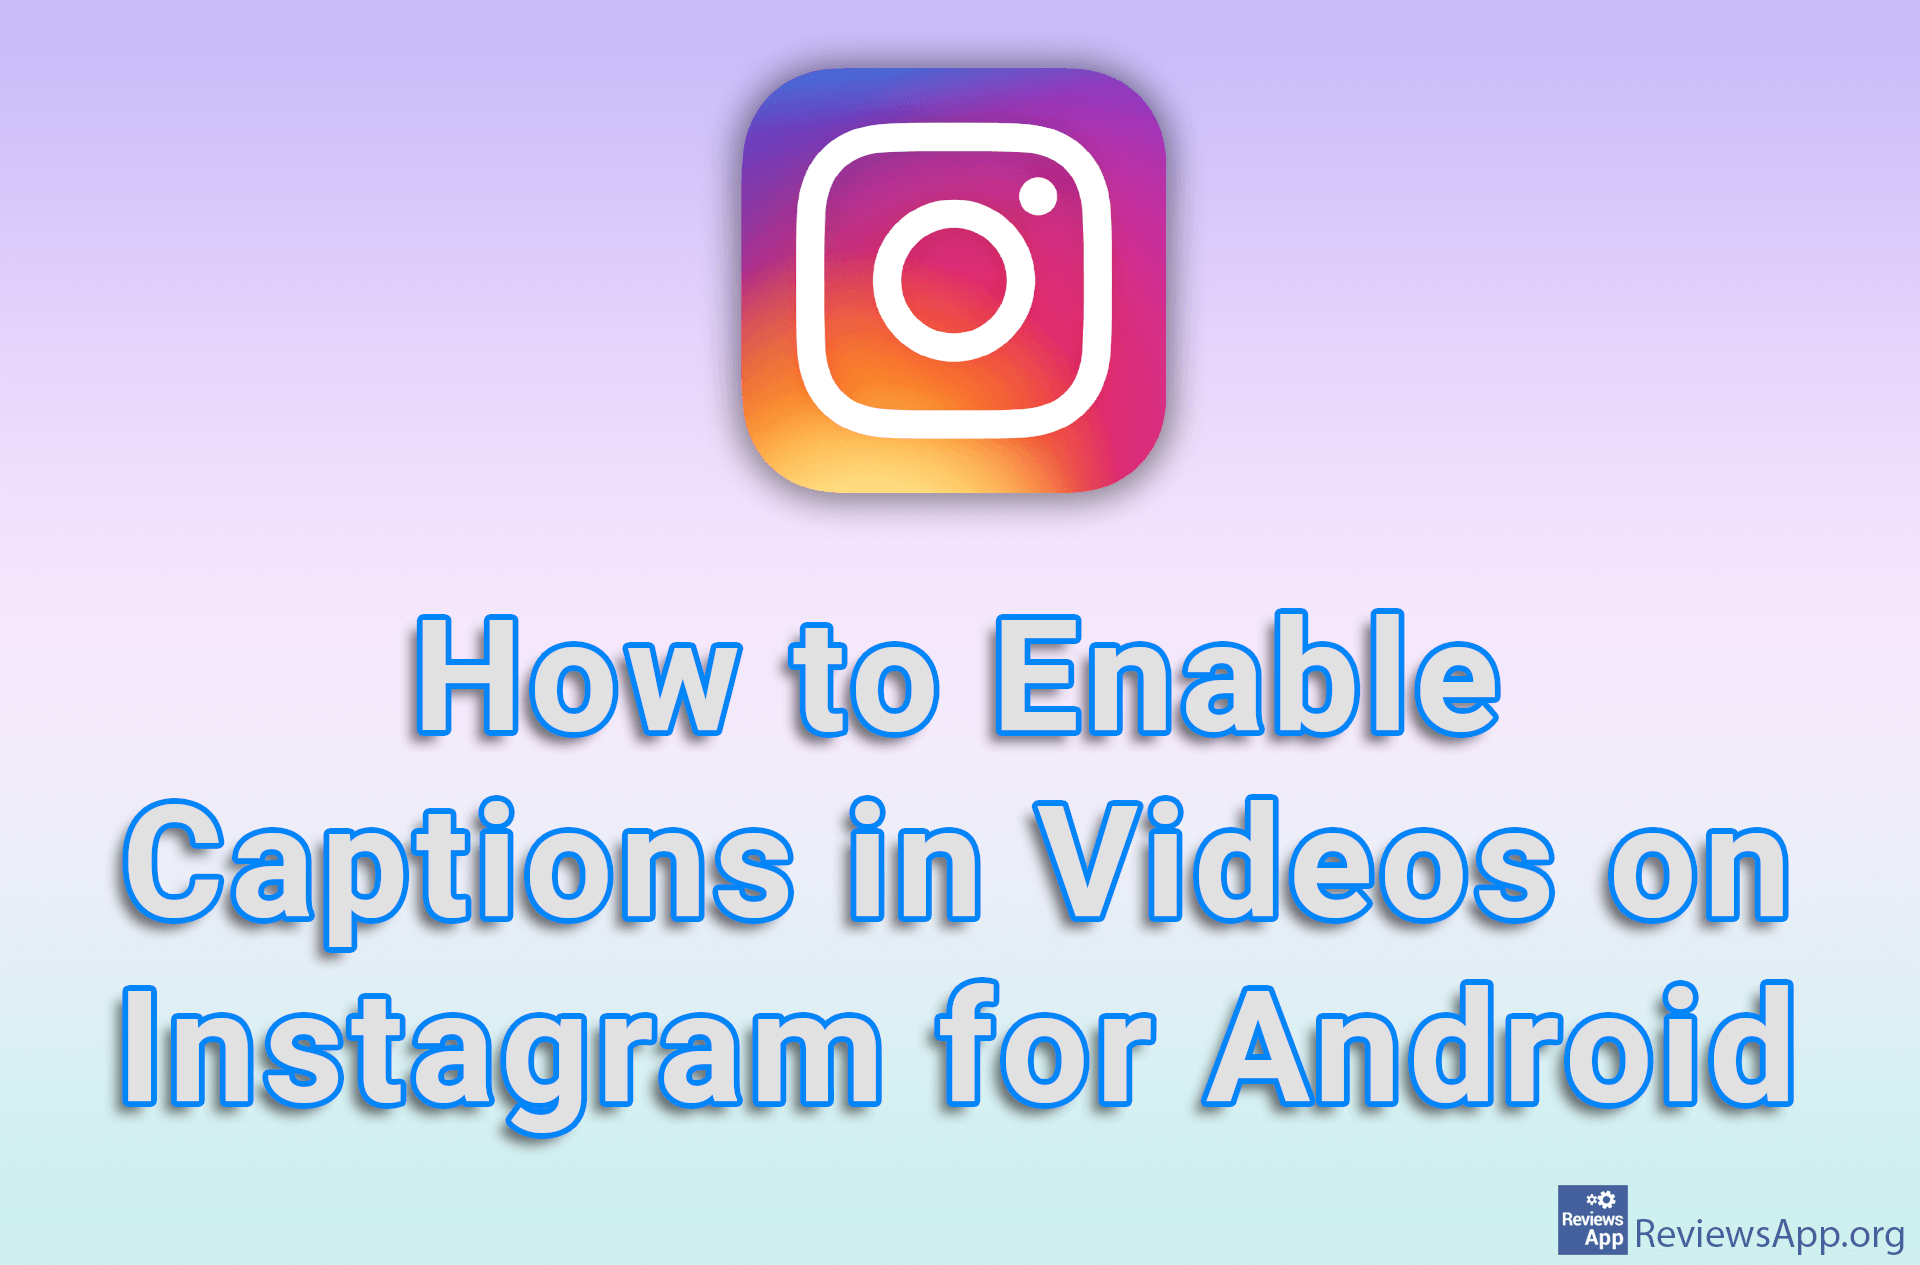 How to Enable Captions in Videos on Instagram for Android